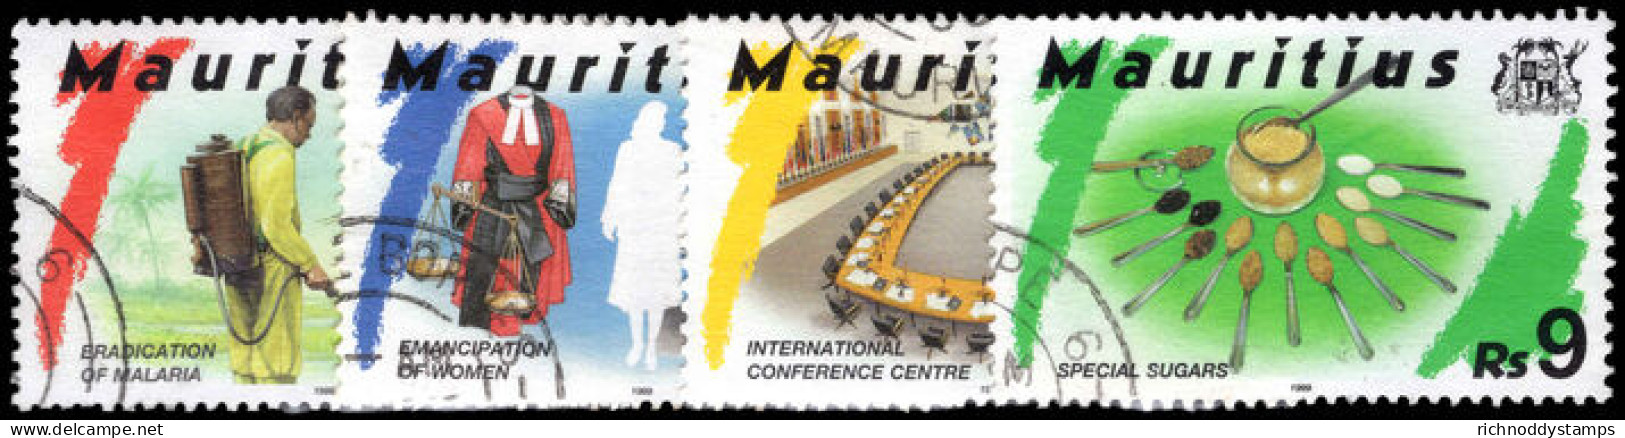 Mauritius 1999 20th Century Acheivements Fine Used. - Maurice (1968-...)